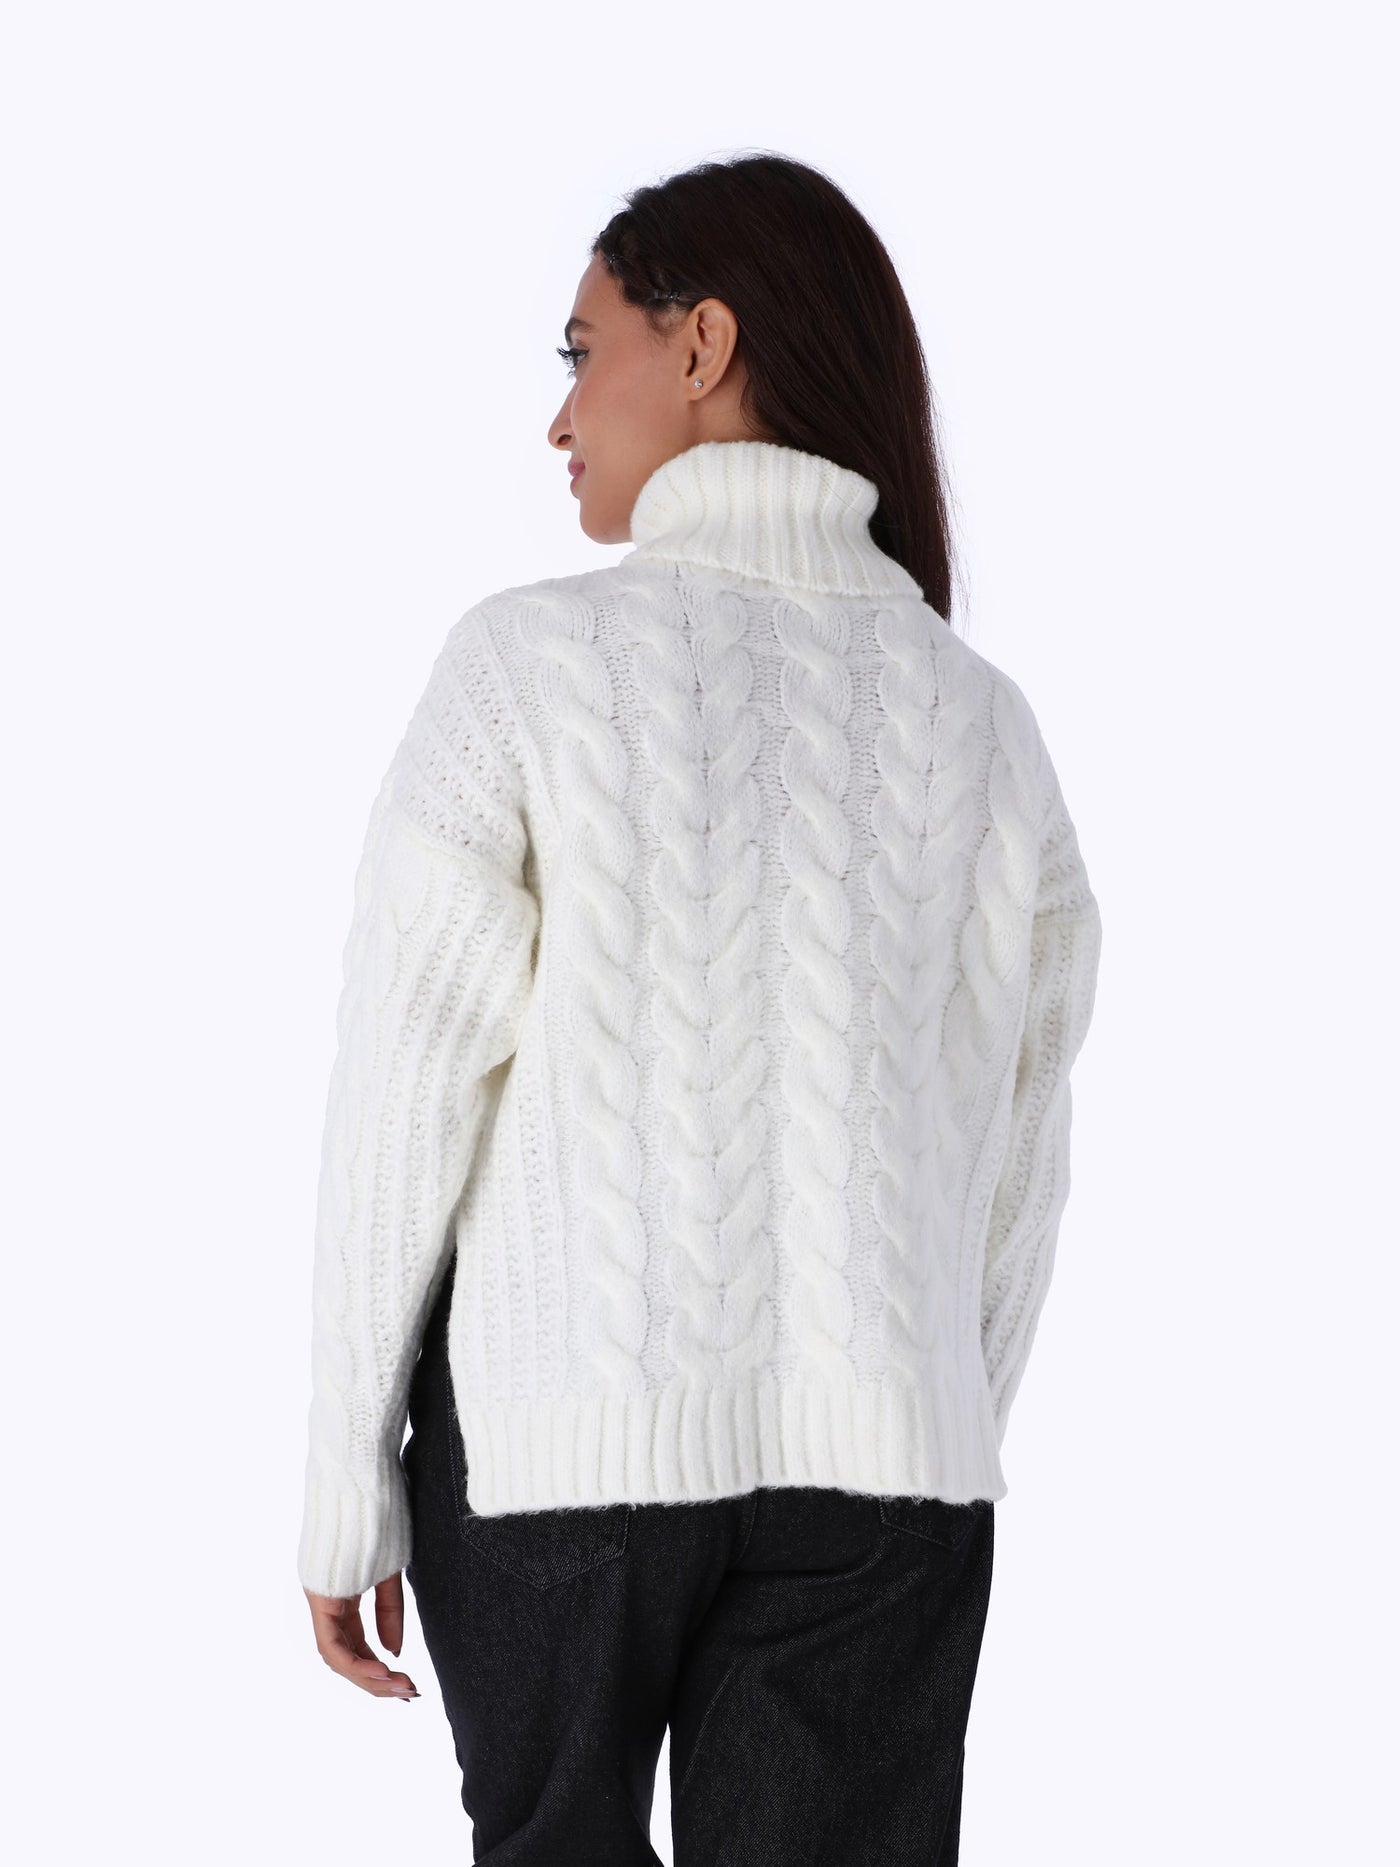 Knit Braided Pullover - Turtle Neck